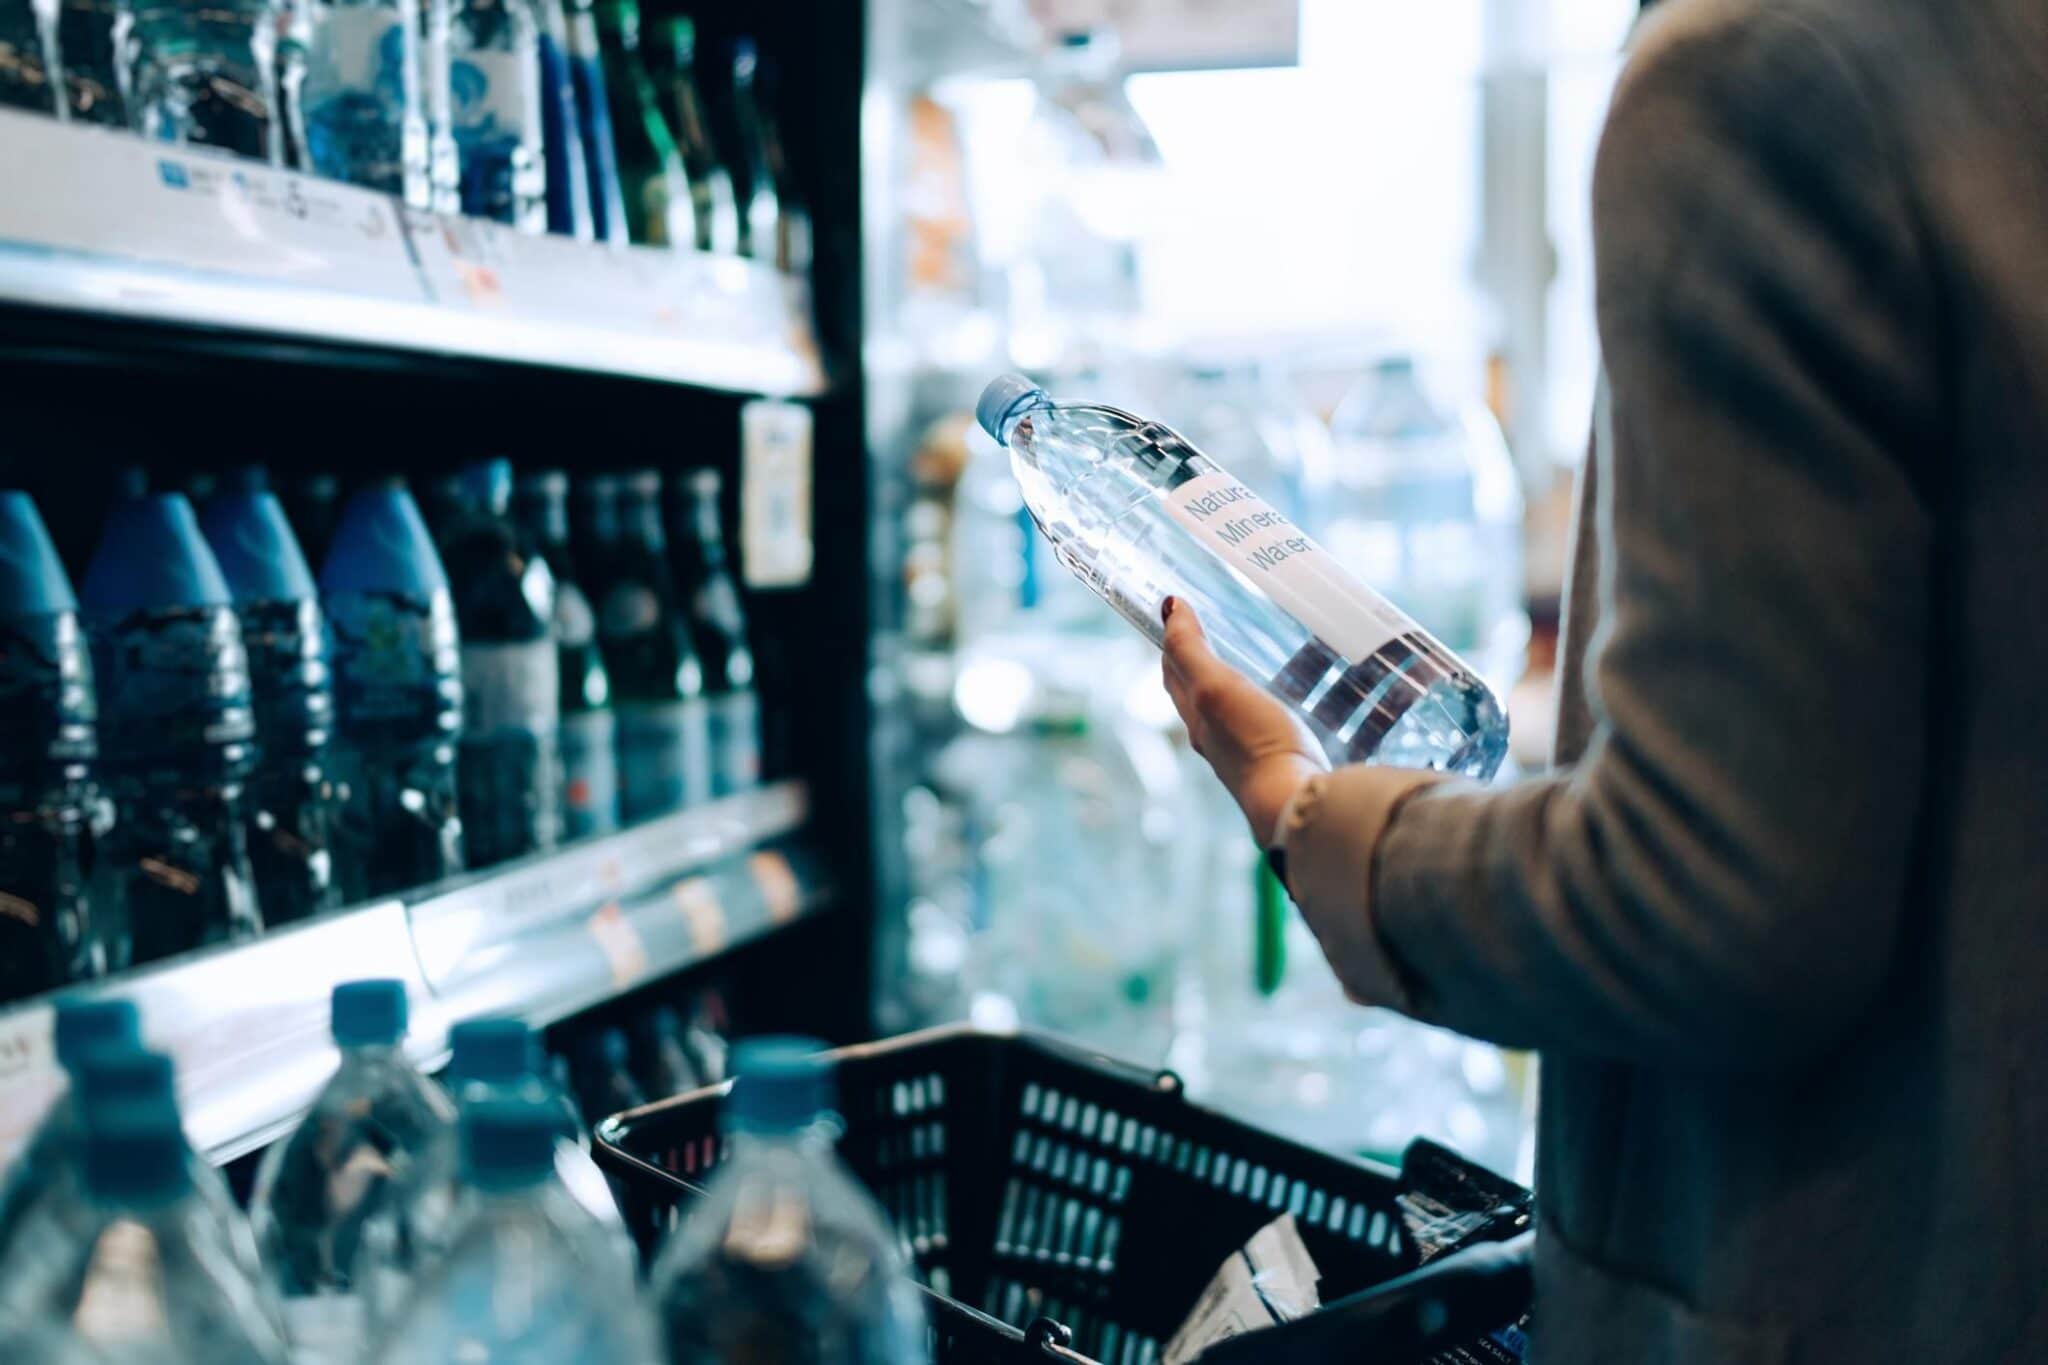 Close up of woman with shopping cart shopping for bottled water along the beverage aisle in a supermarket